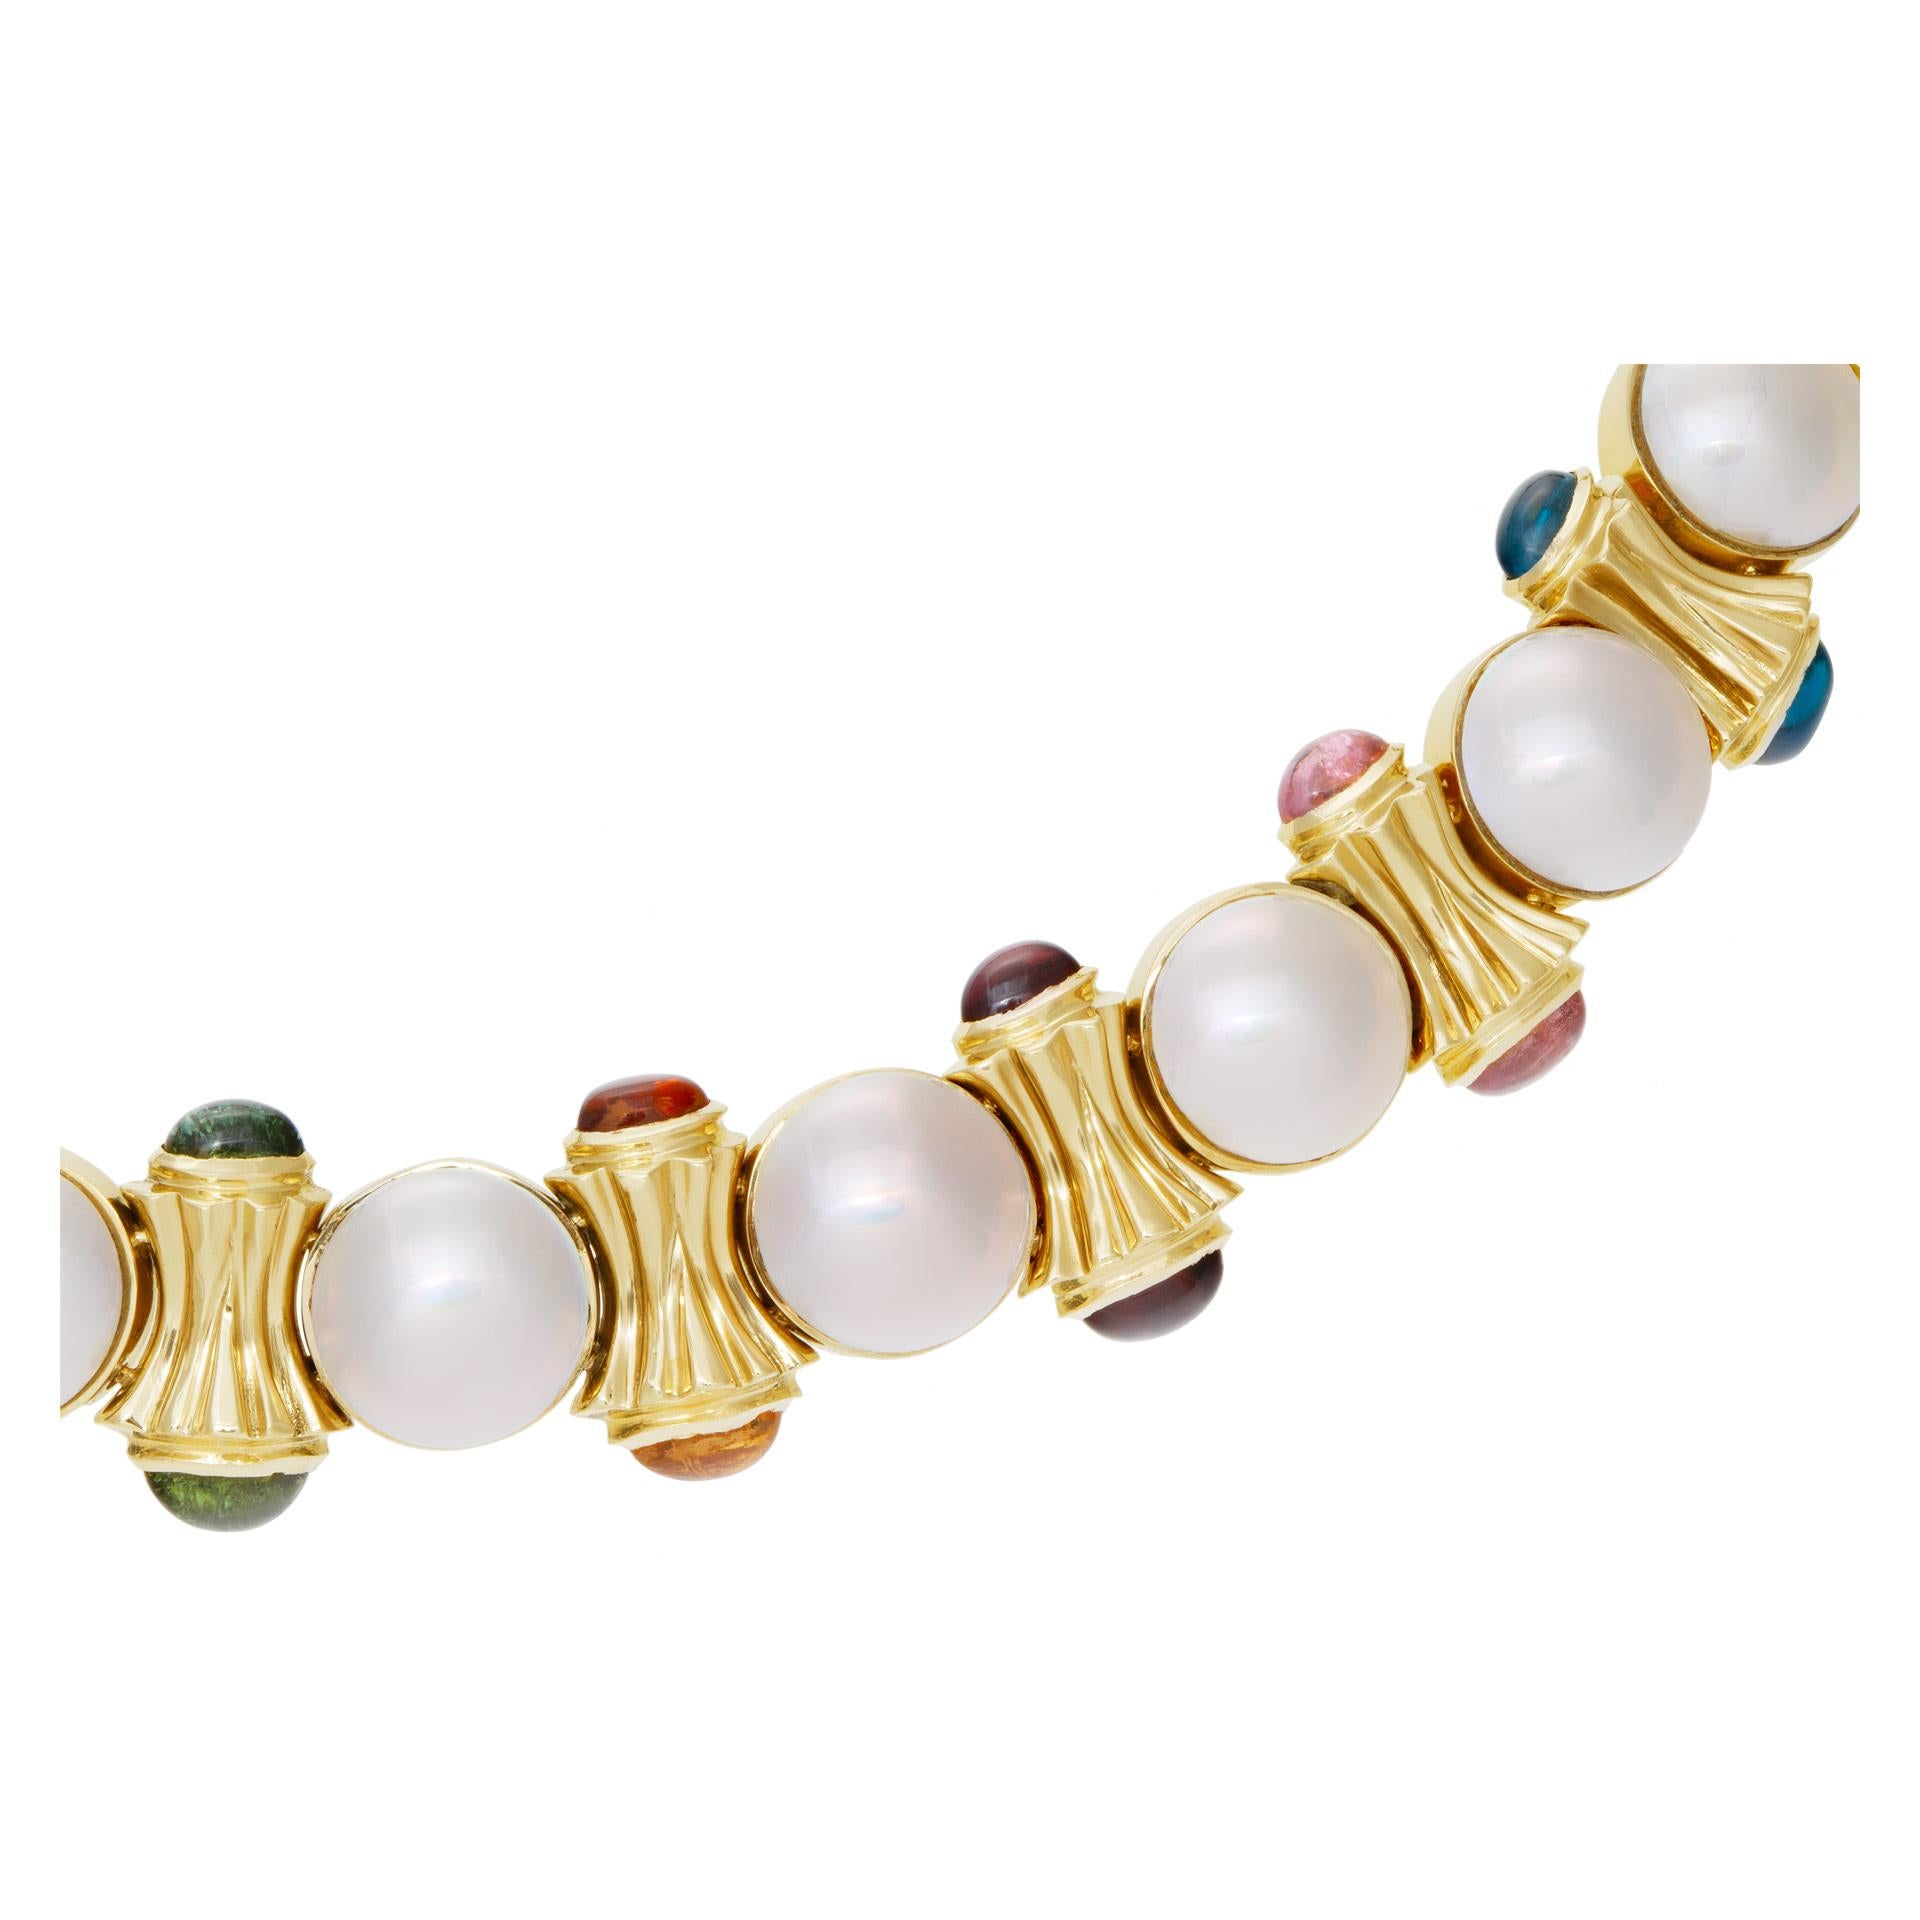 Mobe pearl choker necklace with and colorful blue cabochon, gold topaz, purple amethyst, green peridot and other stones. 11.5mm pearls, 15